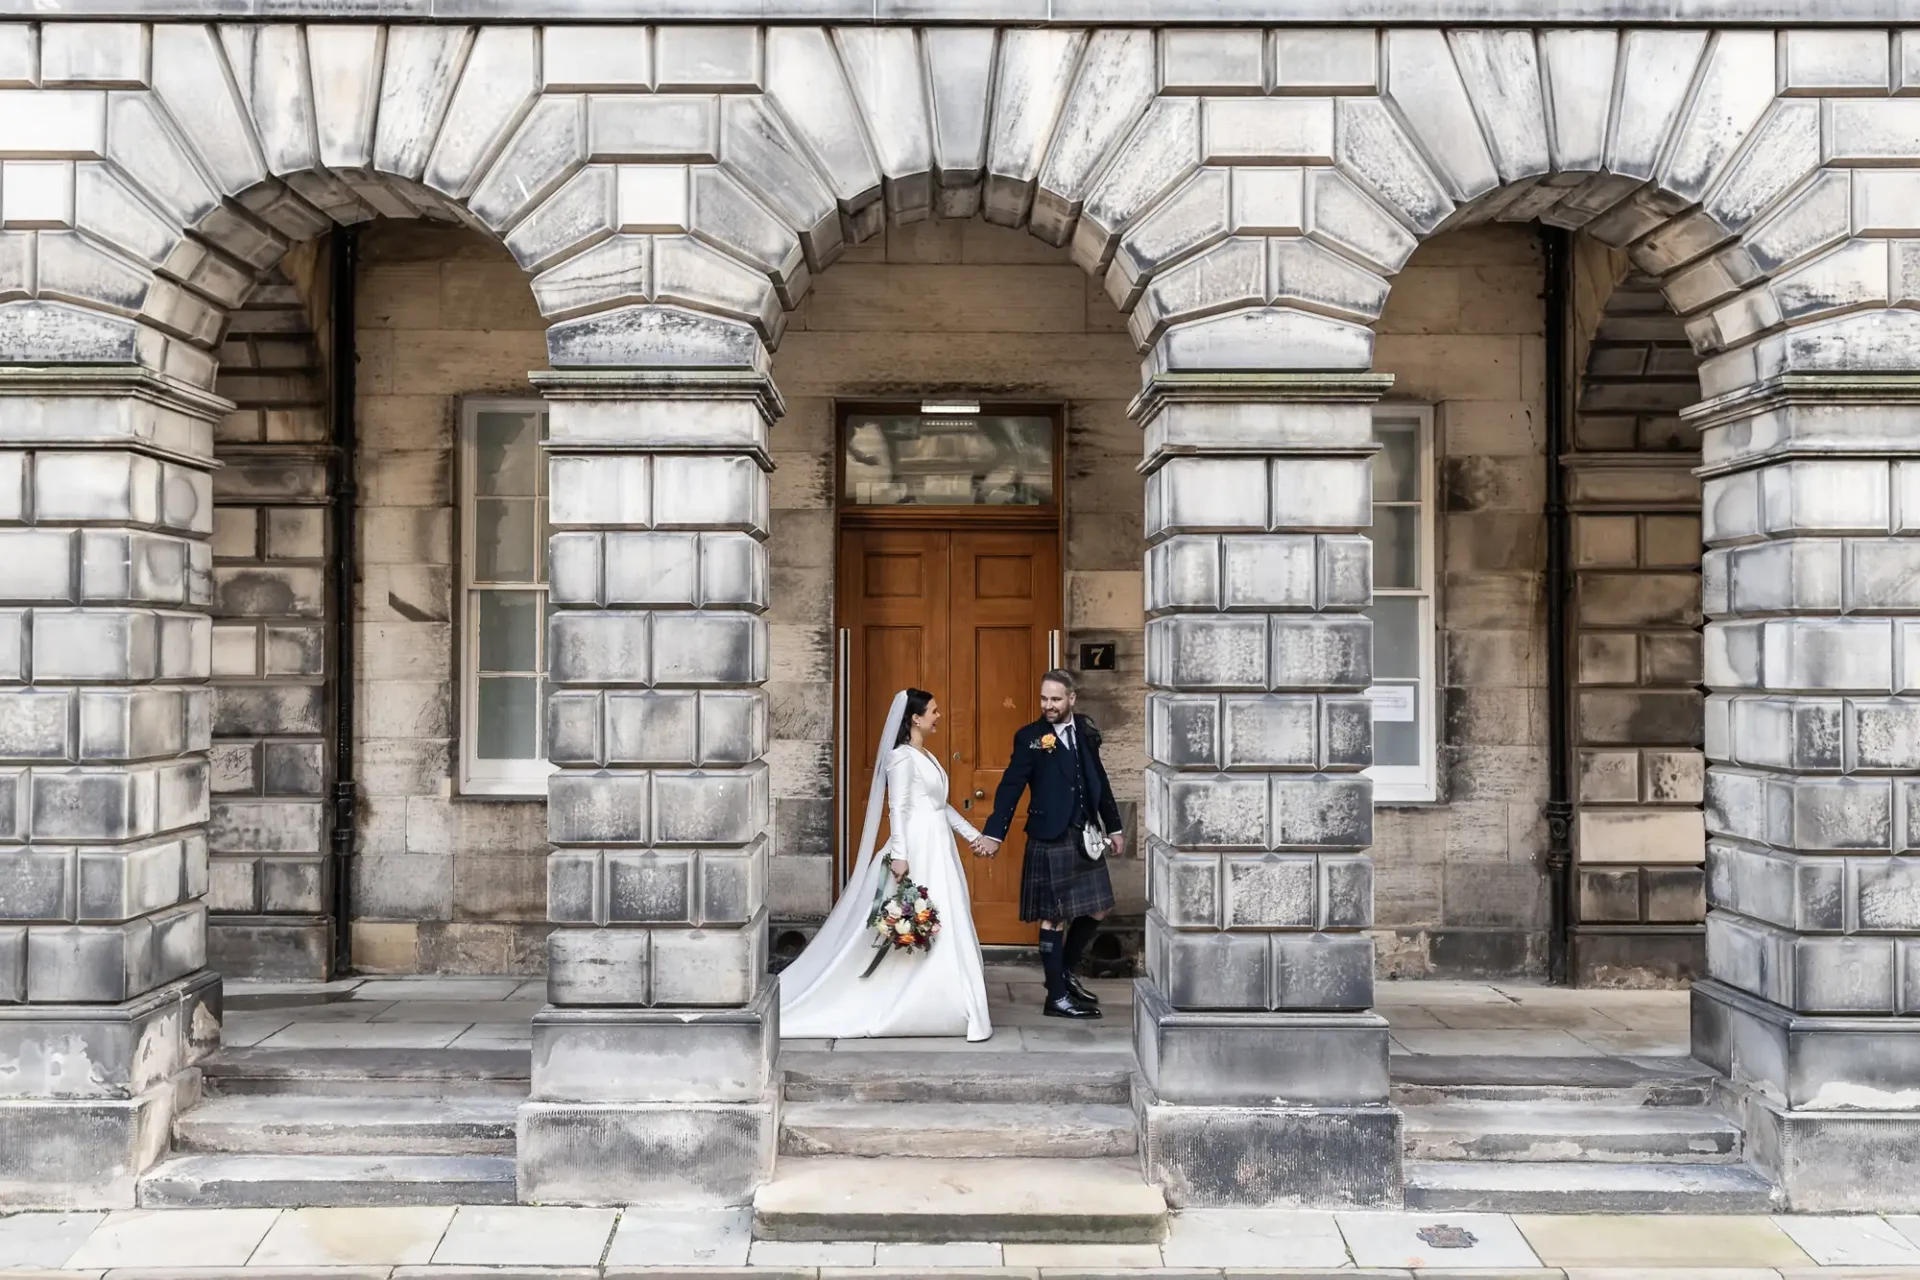 A bride and groom walking hand in hand through a grand stone archway, the groom in a military uniform and the bride in a white dress holding a bouquet.